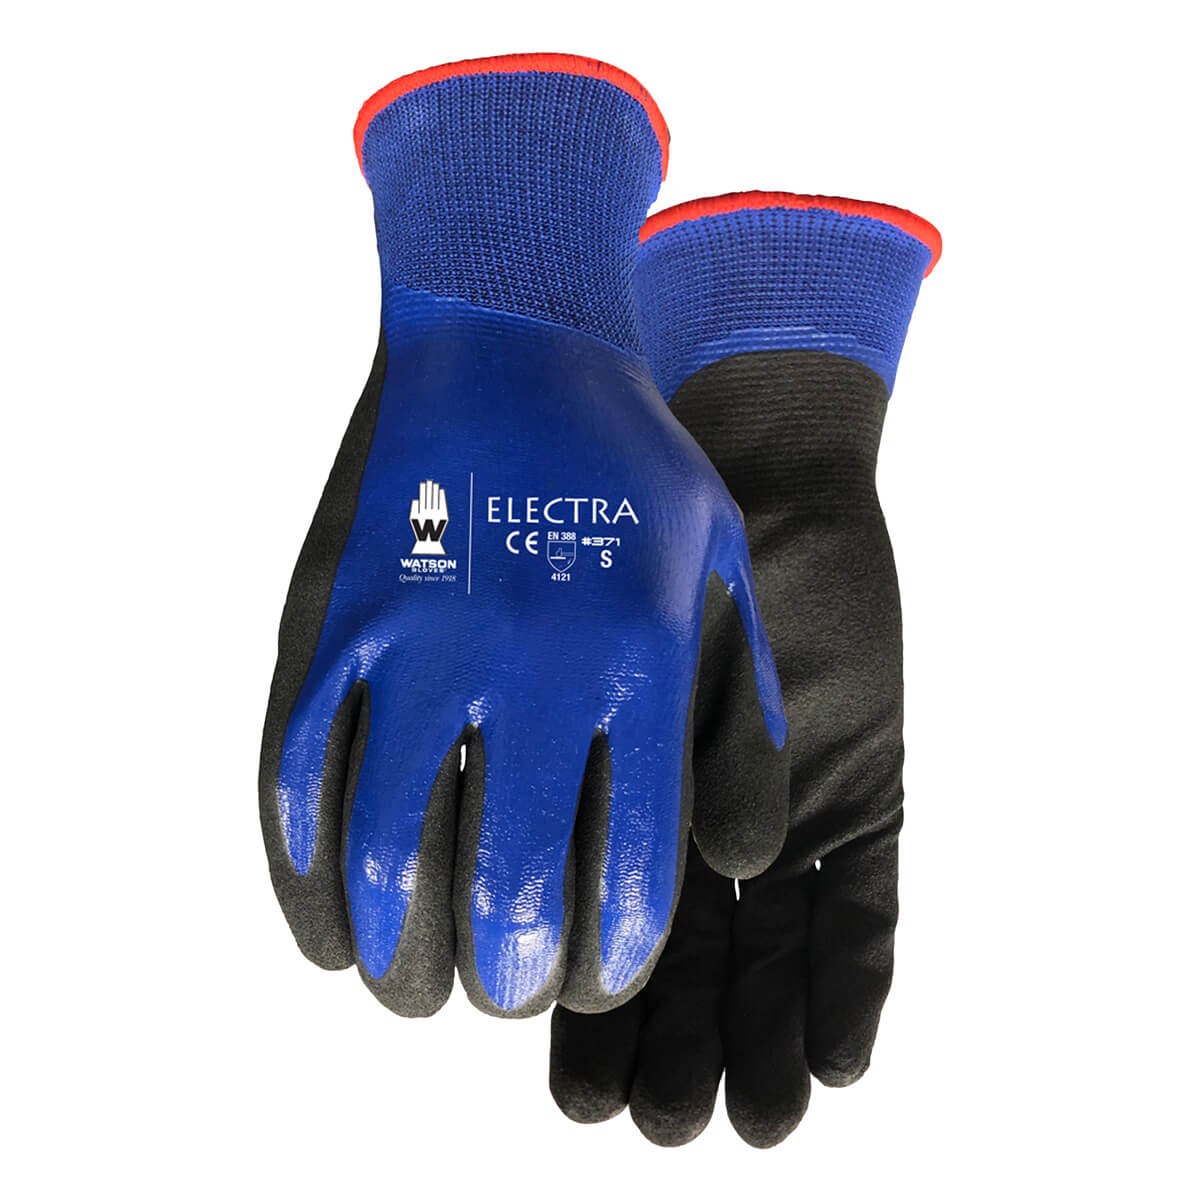 Electra Water Resistant - Gloves - S